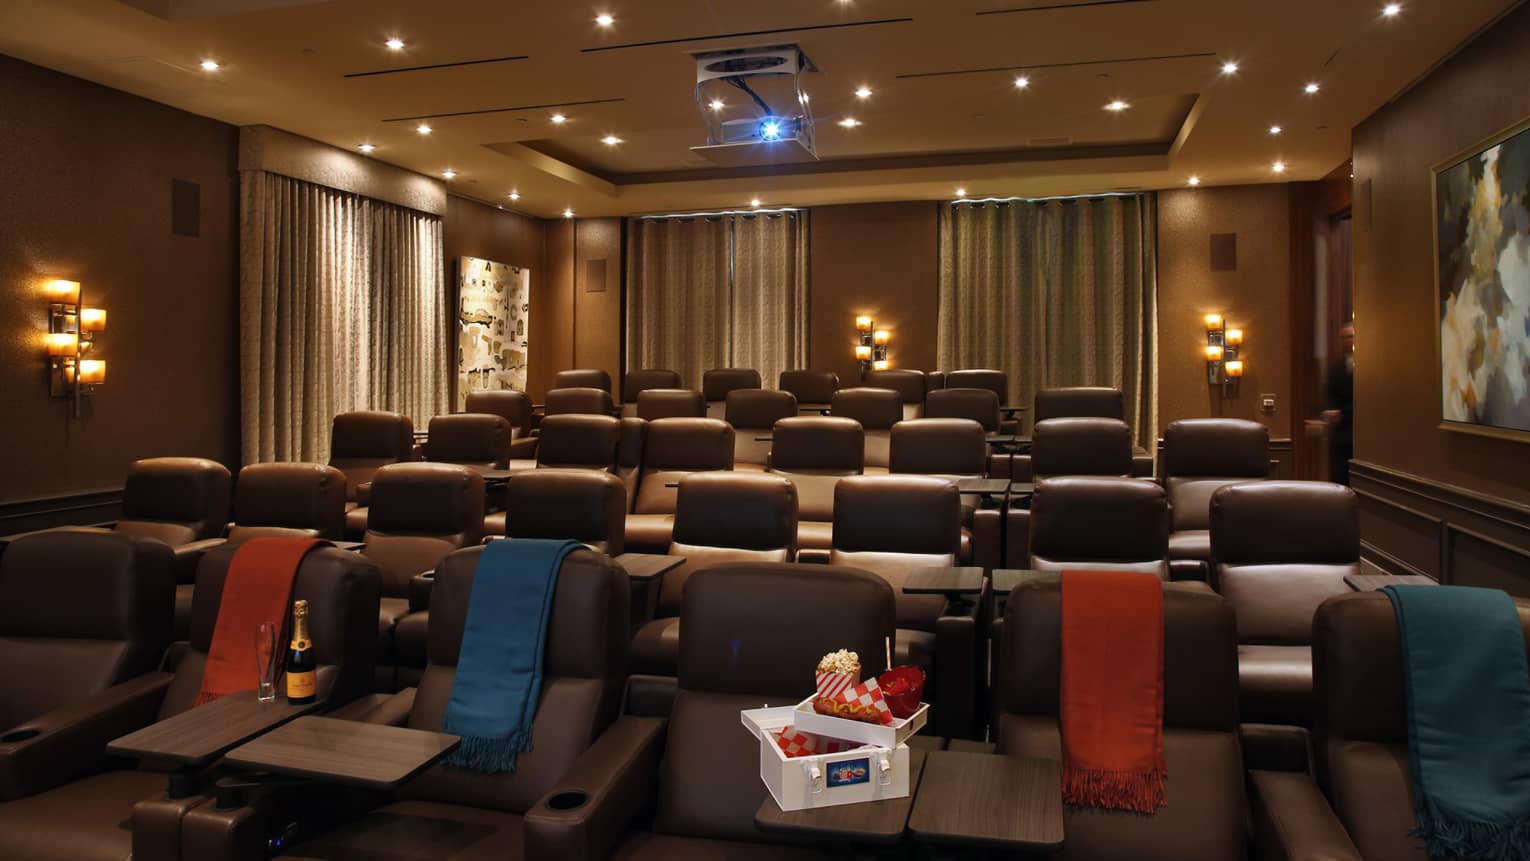 A small movie theatre with a box of snacks in the front row.